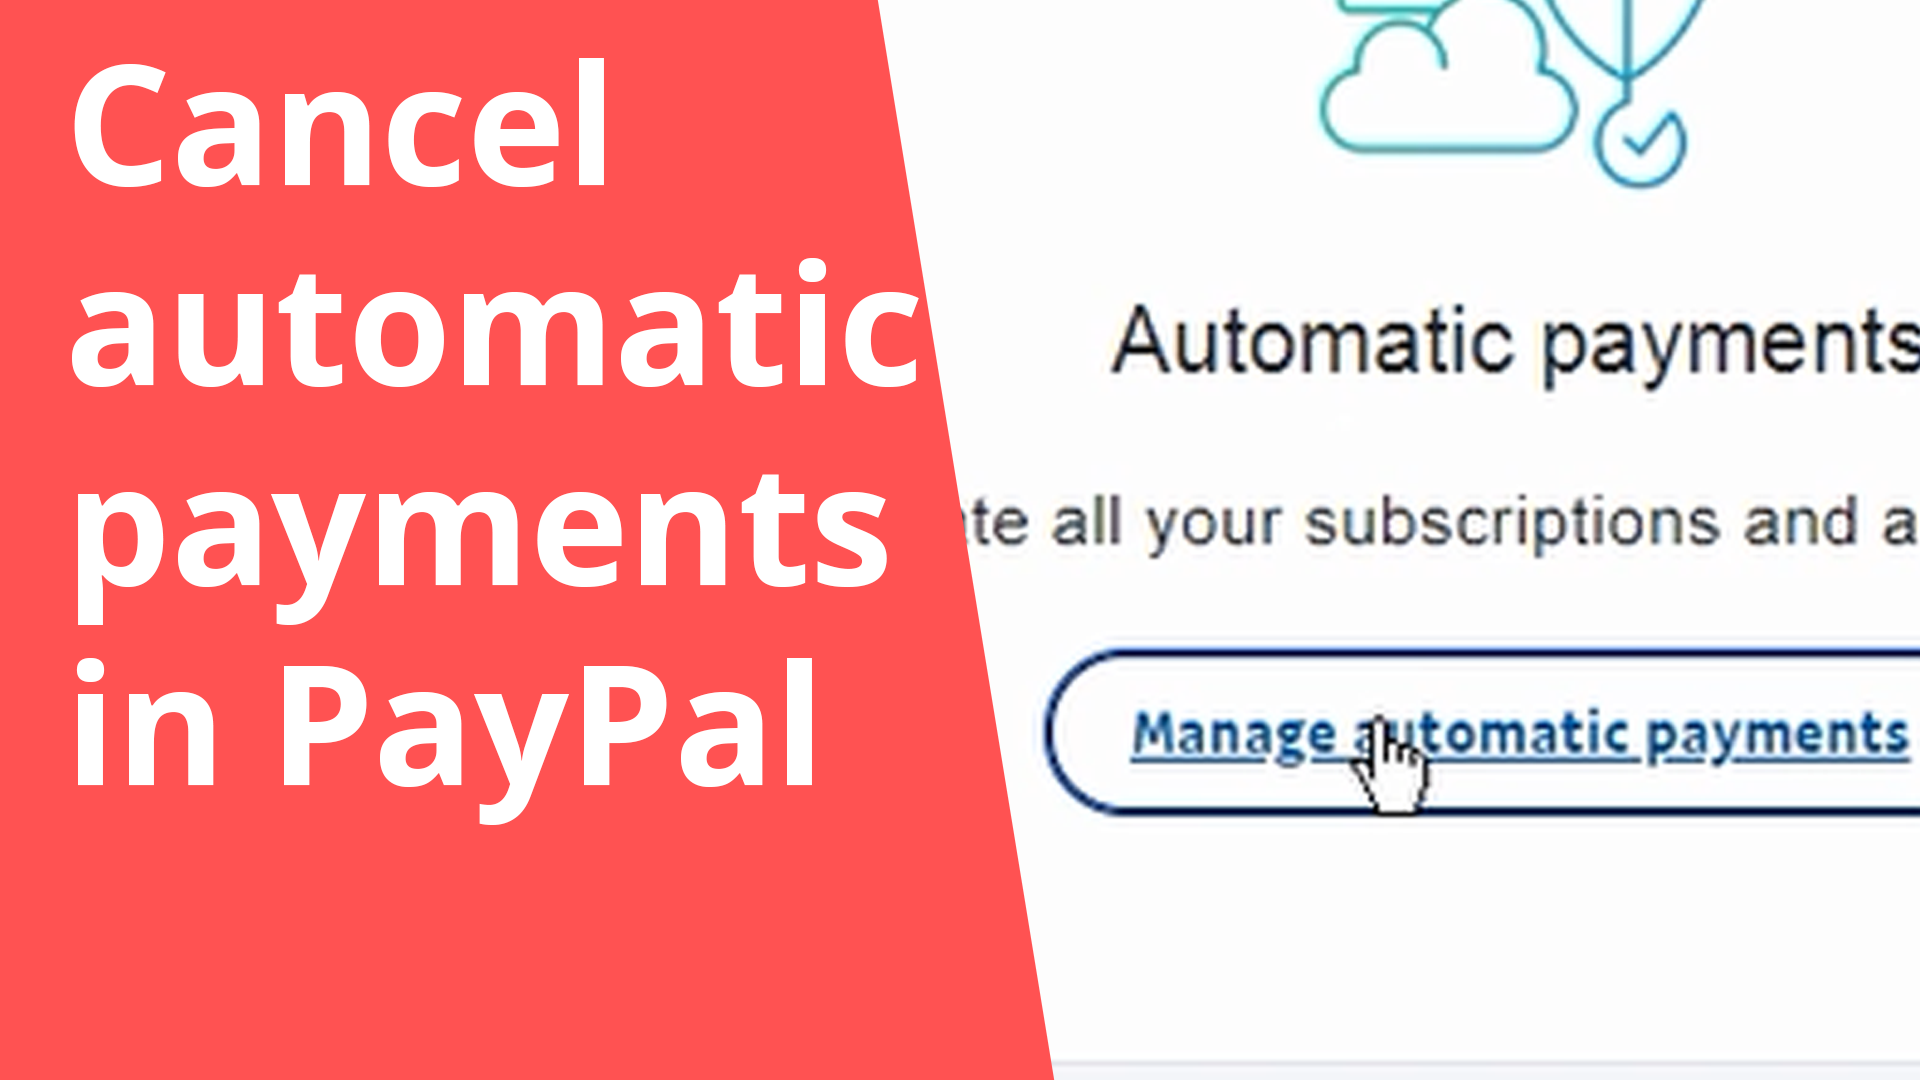 Cancel automatic payments in PayPal